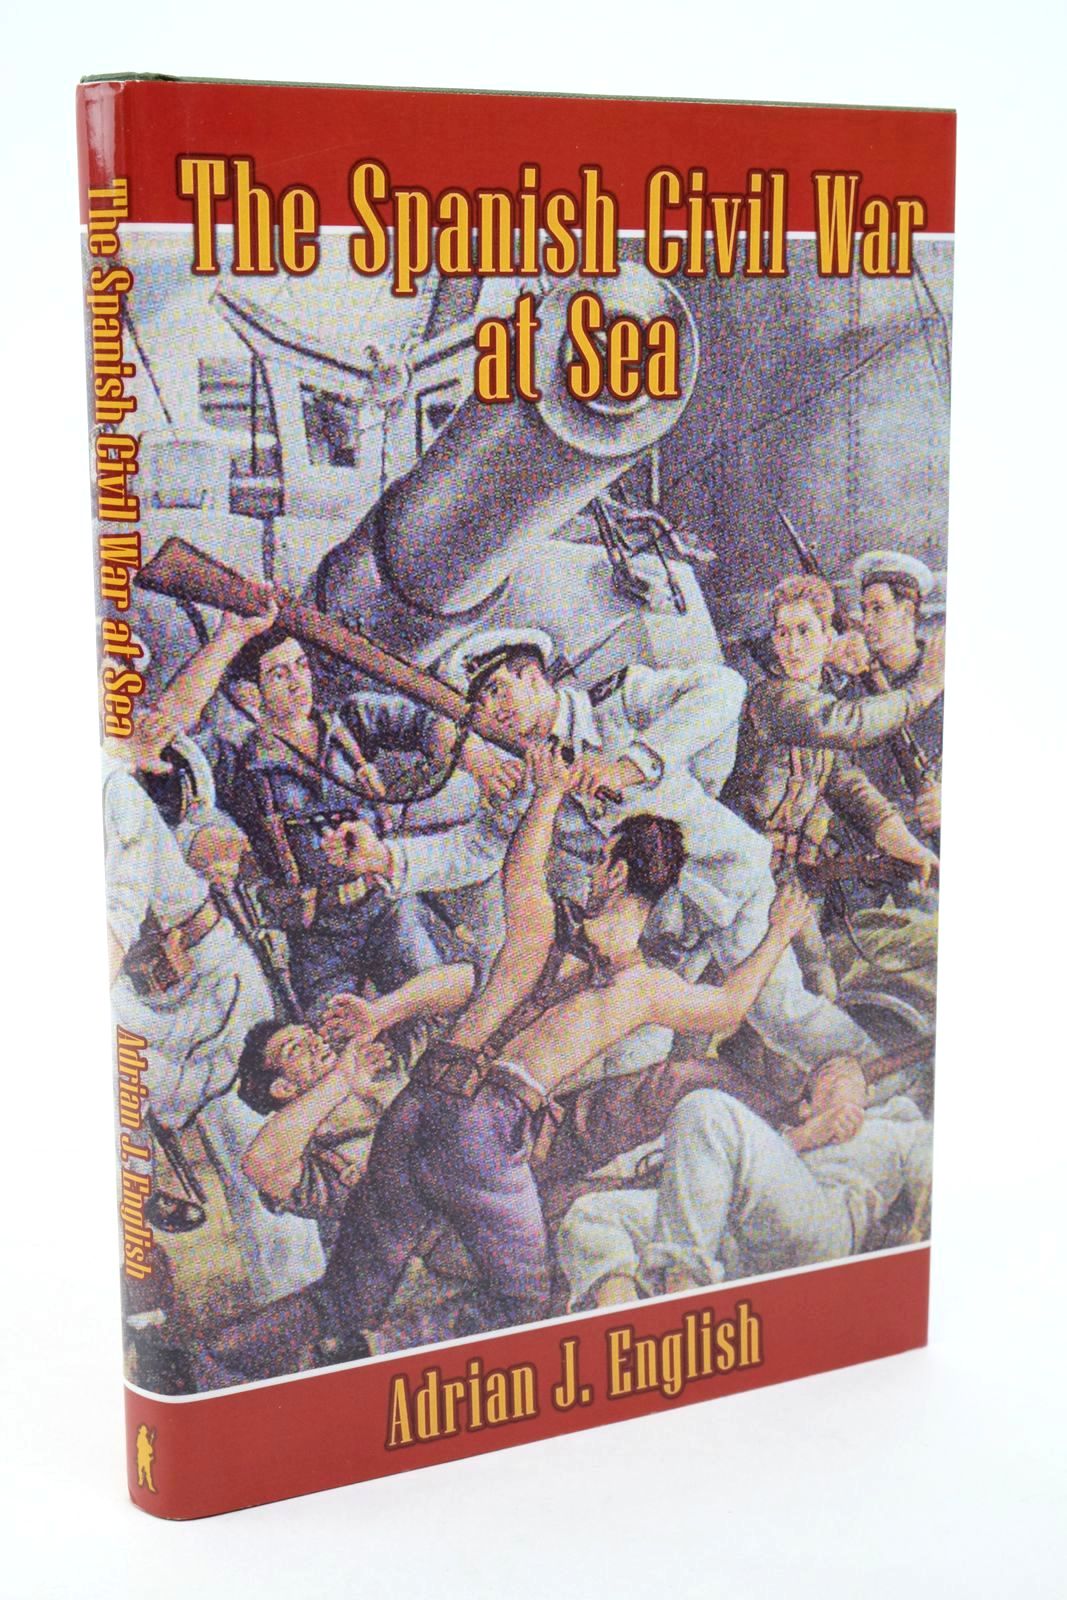 Photo of THE SPANISH CIVIL WAR AT SEA written by English, Adrian published by Partizan Press (STOCK CODE: 1322639)  for sale by Stella & Rose's Books